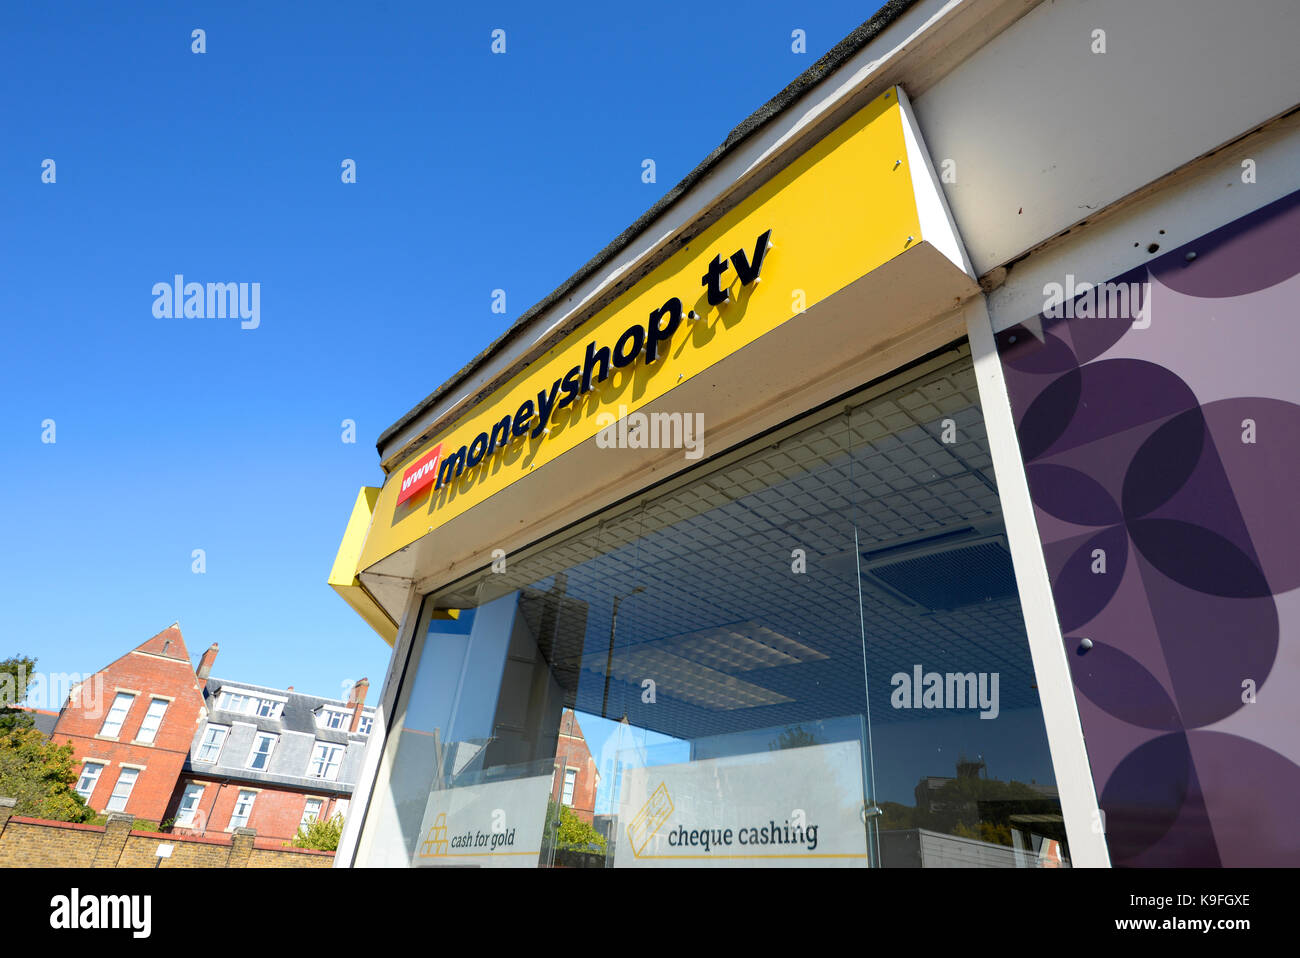 Moneyshop tv. The Money Shop, London Road, Southend on Sea, Essex. Shop front. Loans and lending, pawnbroker, cheque cashing, check cashing Stock Photo